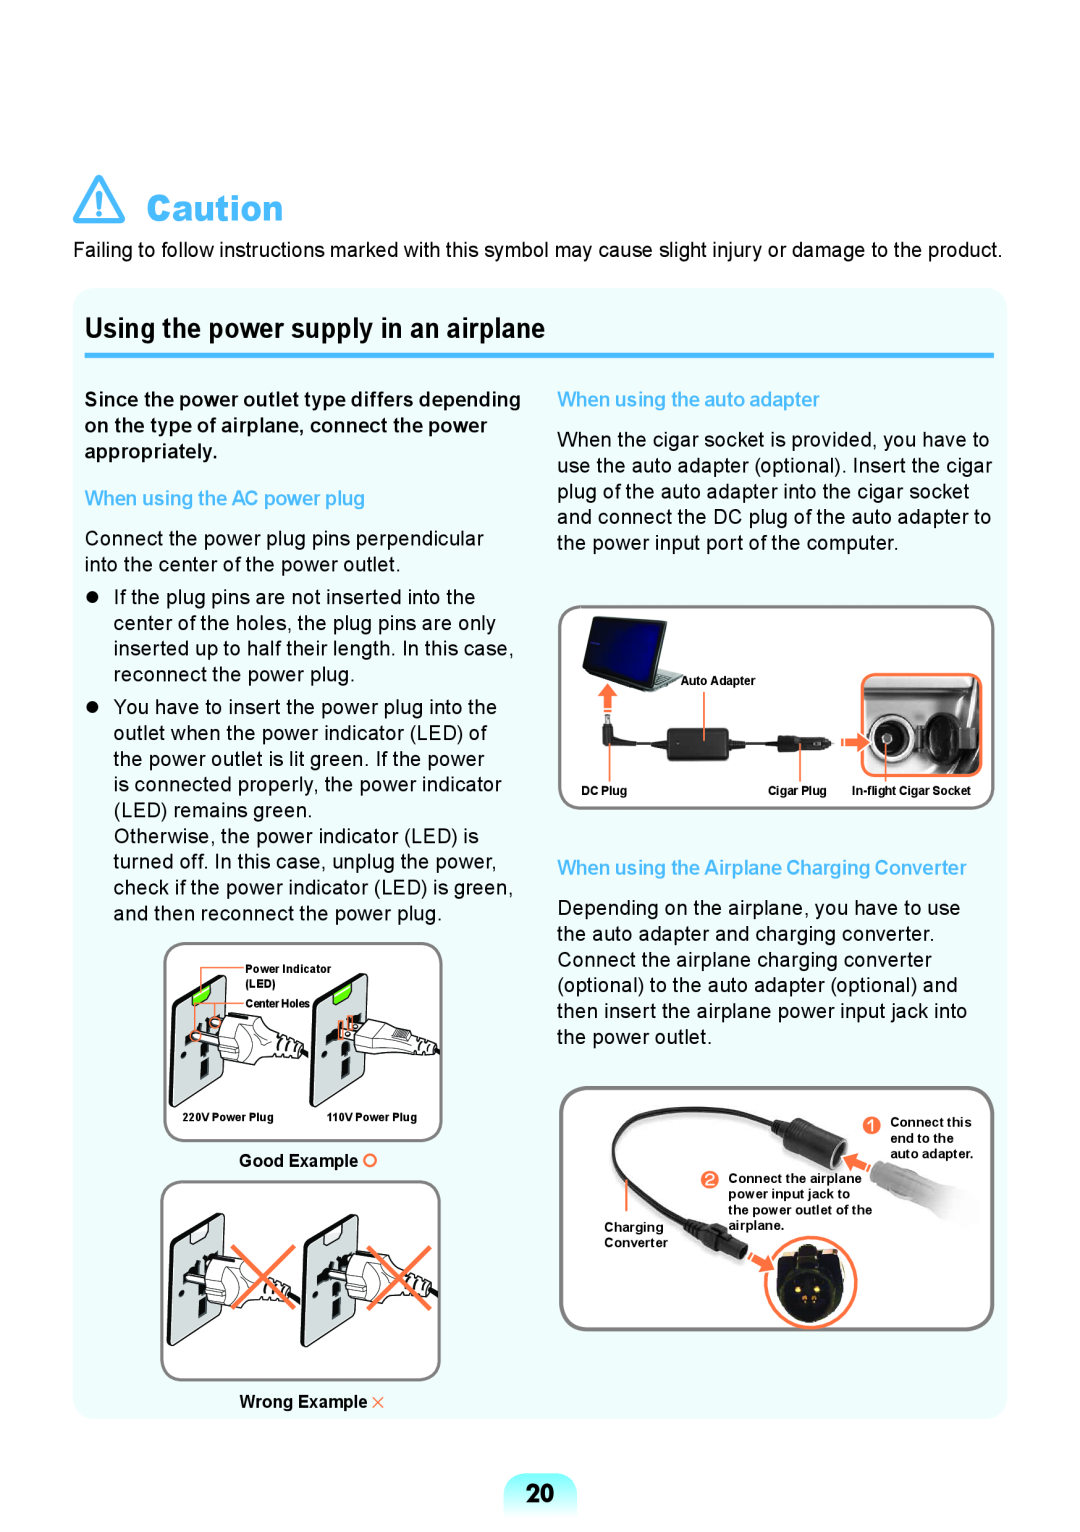 Samsung NP-RV408-A01RU Using the power supply in an airplane, When using the AC power plug, When using the auto adapter 